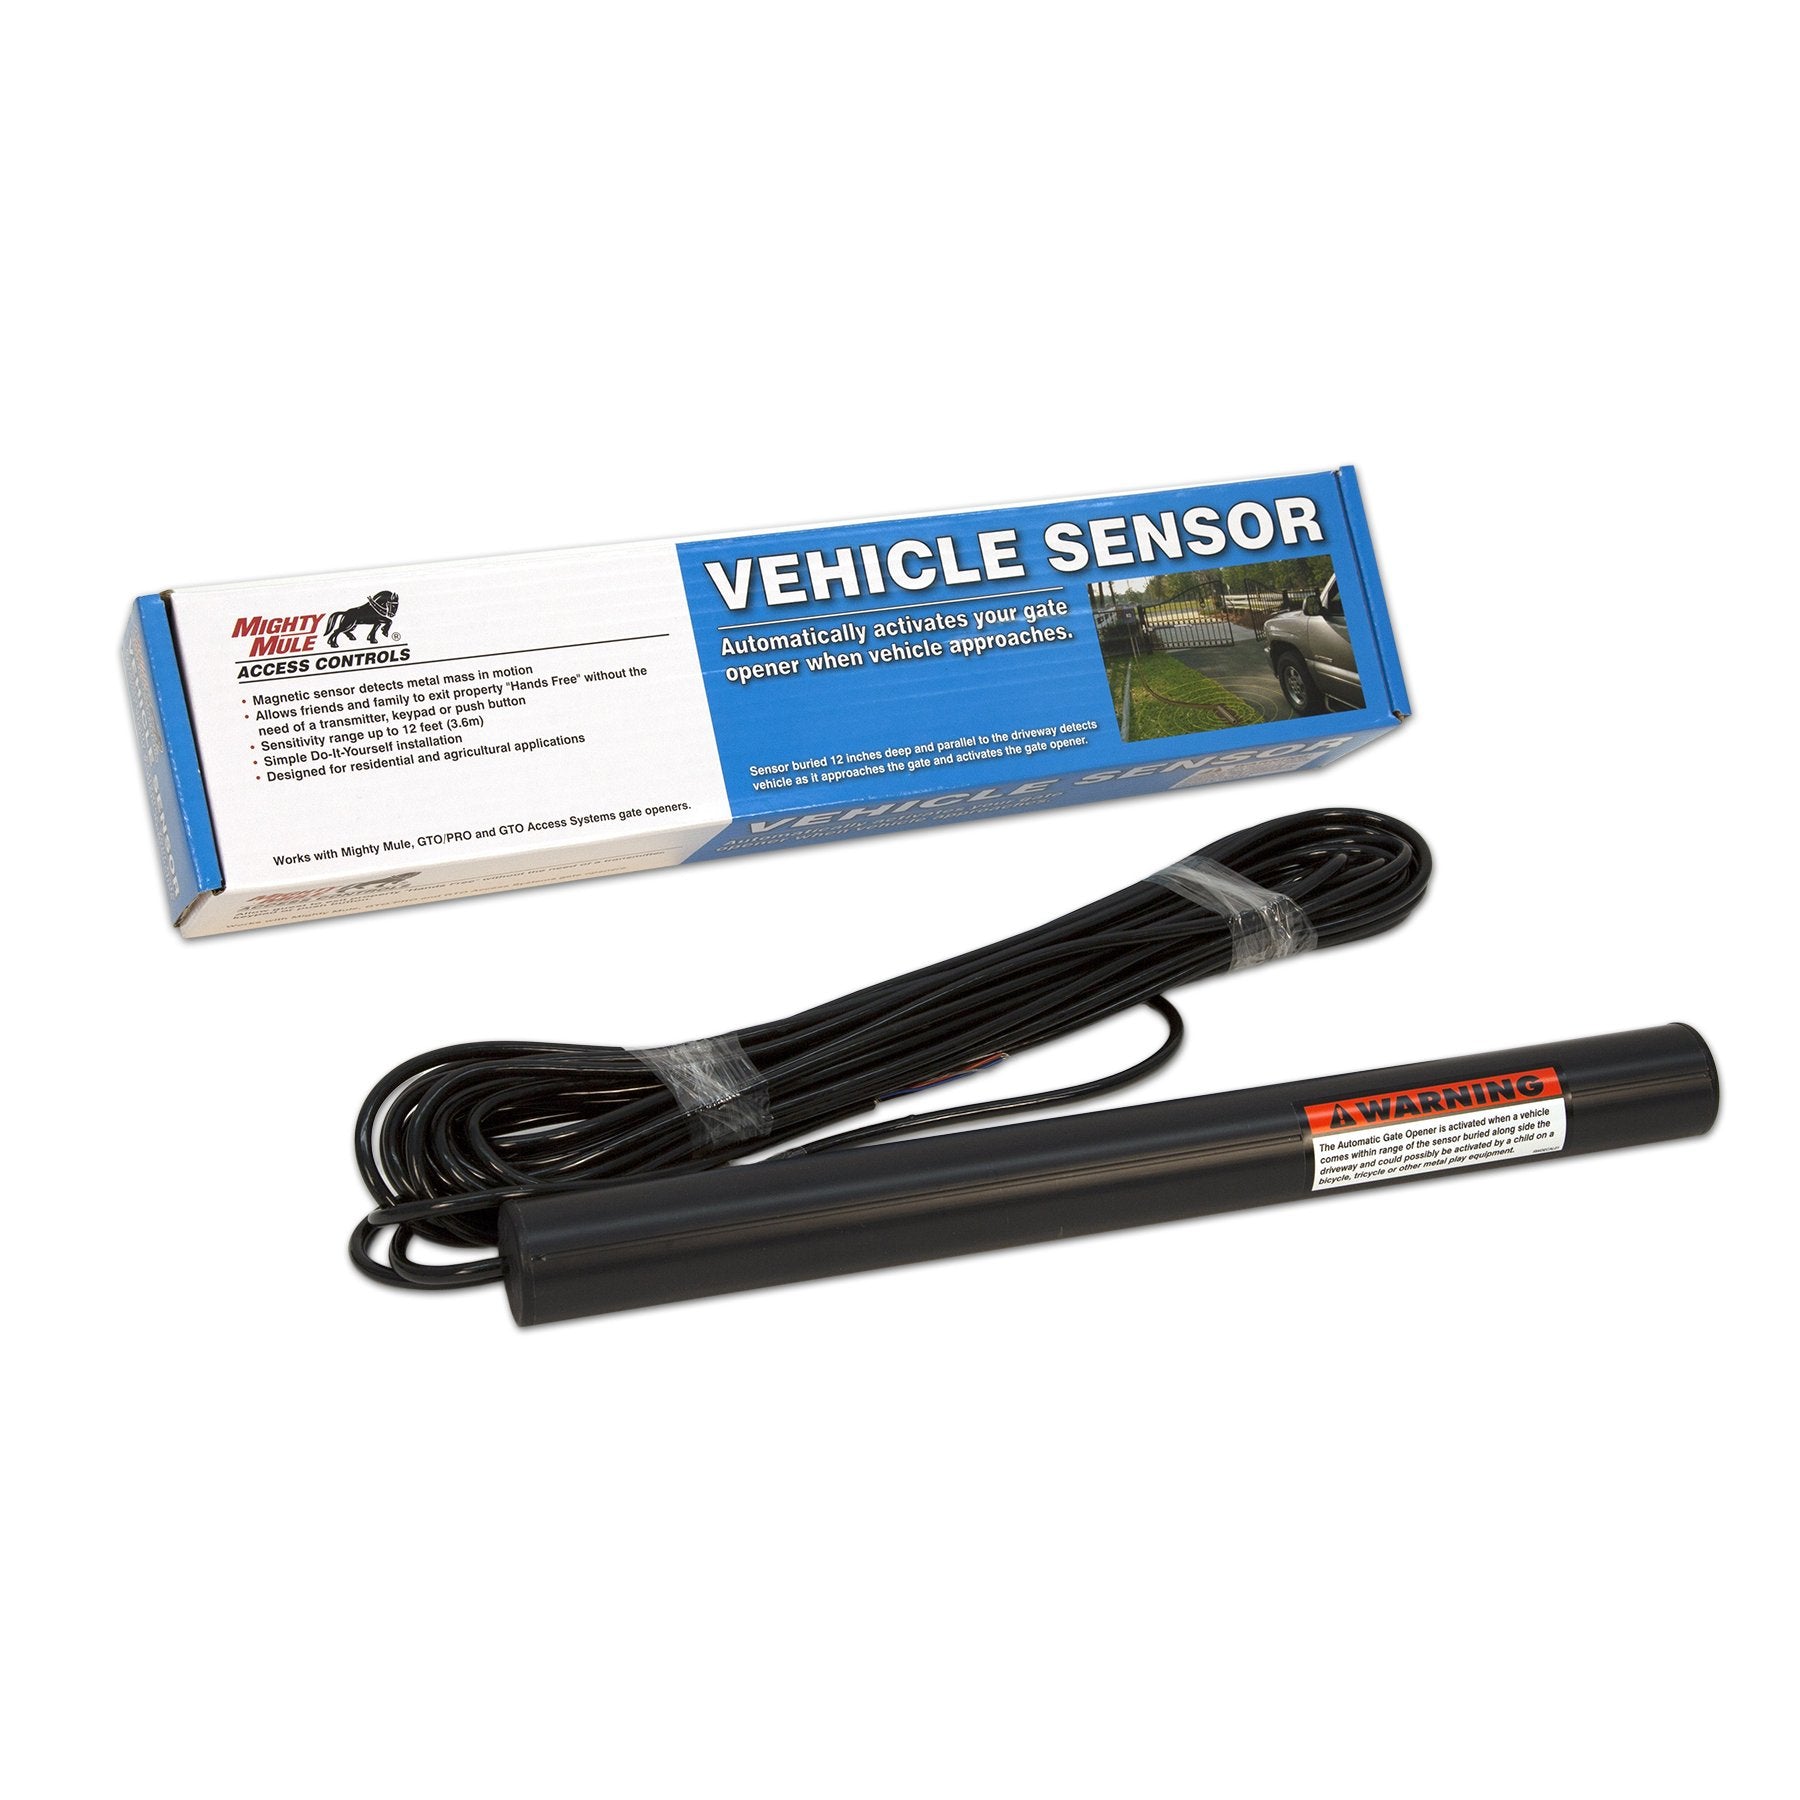 100 Ft. Driveway Vehicle Sensor (FM140) for Mighty Mule Automatic Gate Opener (8095262802158)